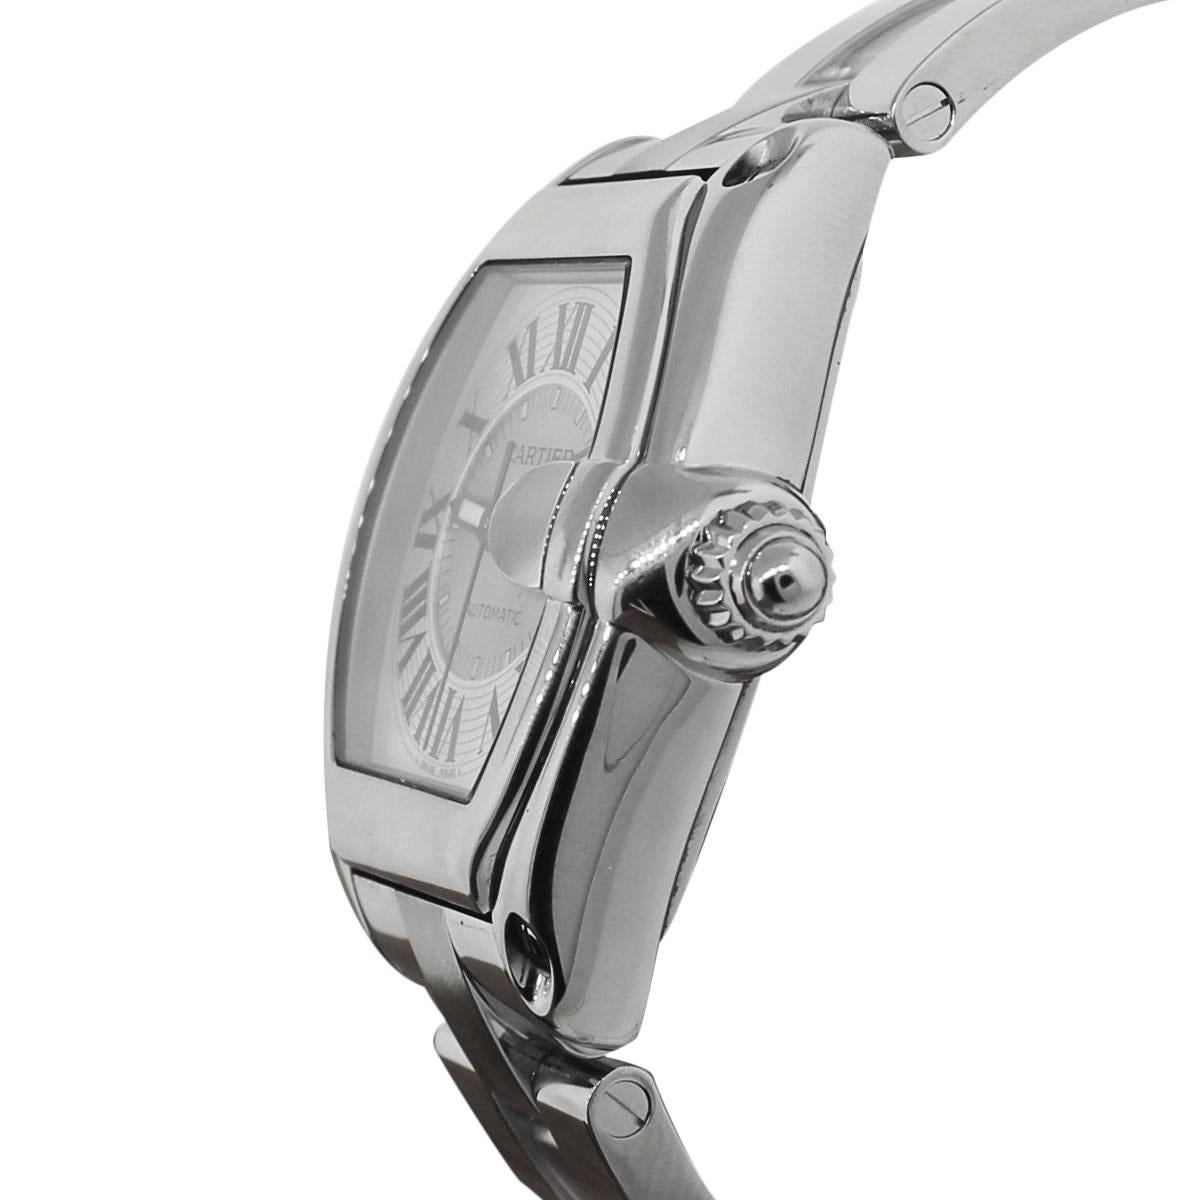 Brand: Cartier
MPN: 2510
Model: Roadster
Case Material: Stainless Steel
Case Diameter: 38mm
Crystal: Scratch resistant sapphire
Bezel: Smooth fixed stainless steel bezel
Dial: Silvered dial with date displayed at 3 o’ clock. Date, Hours, Minutes,